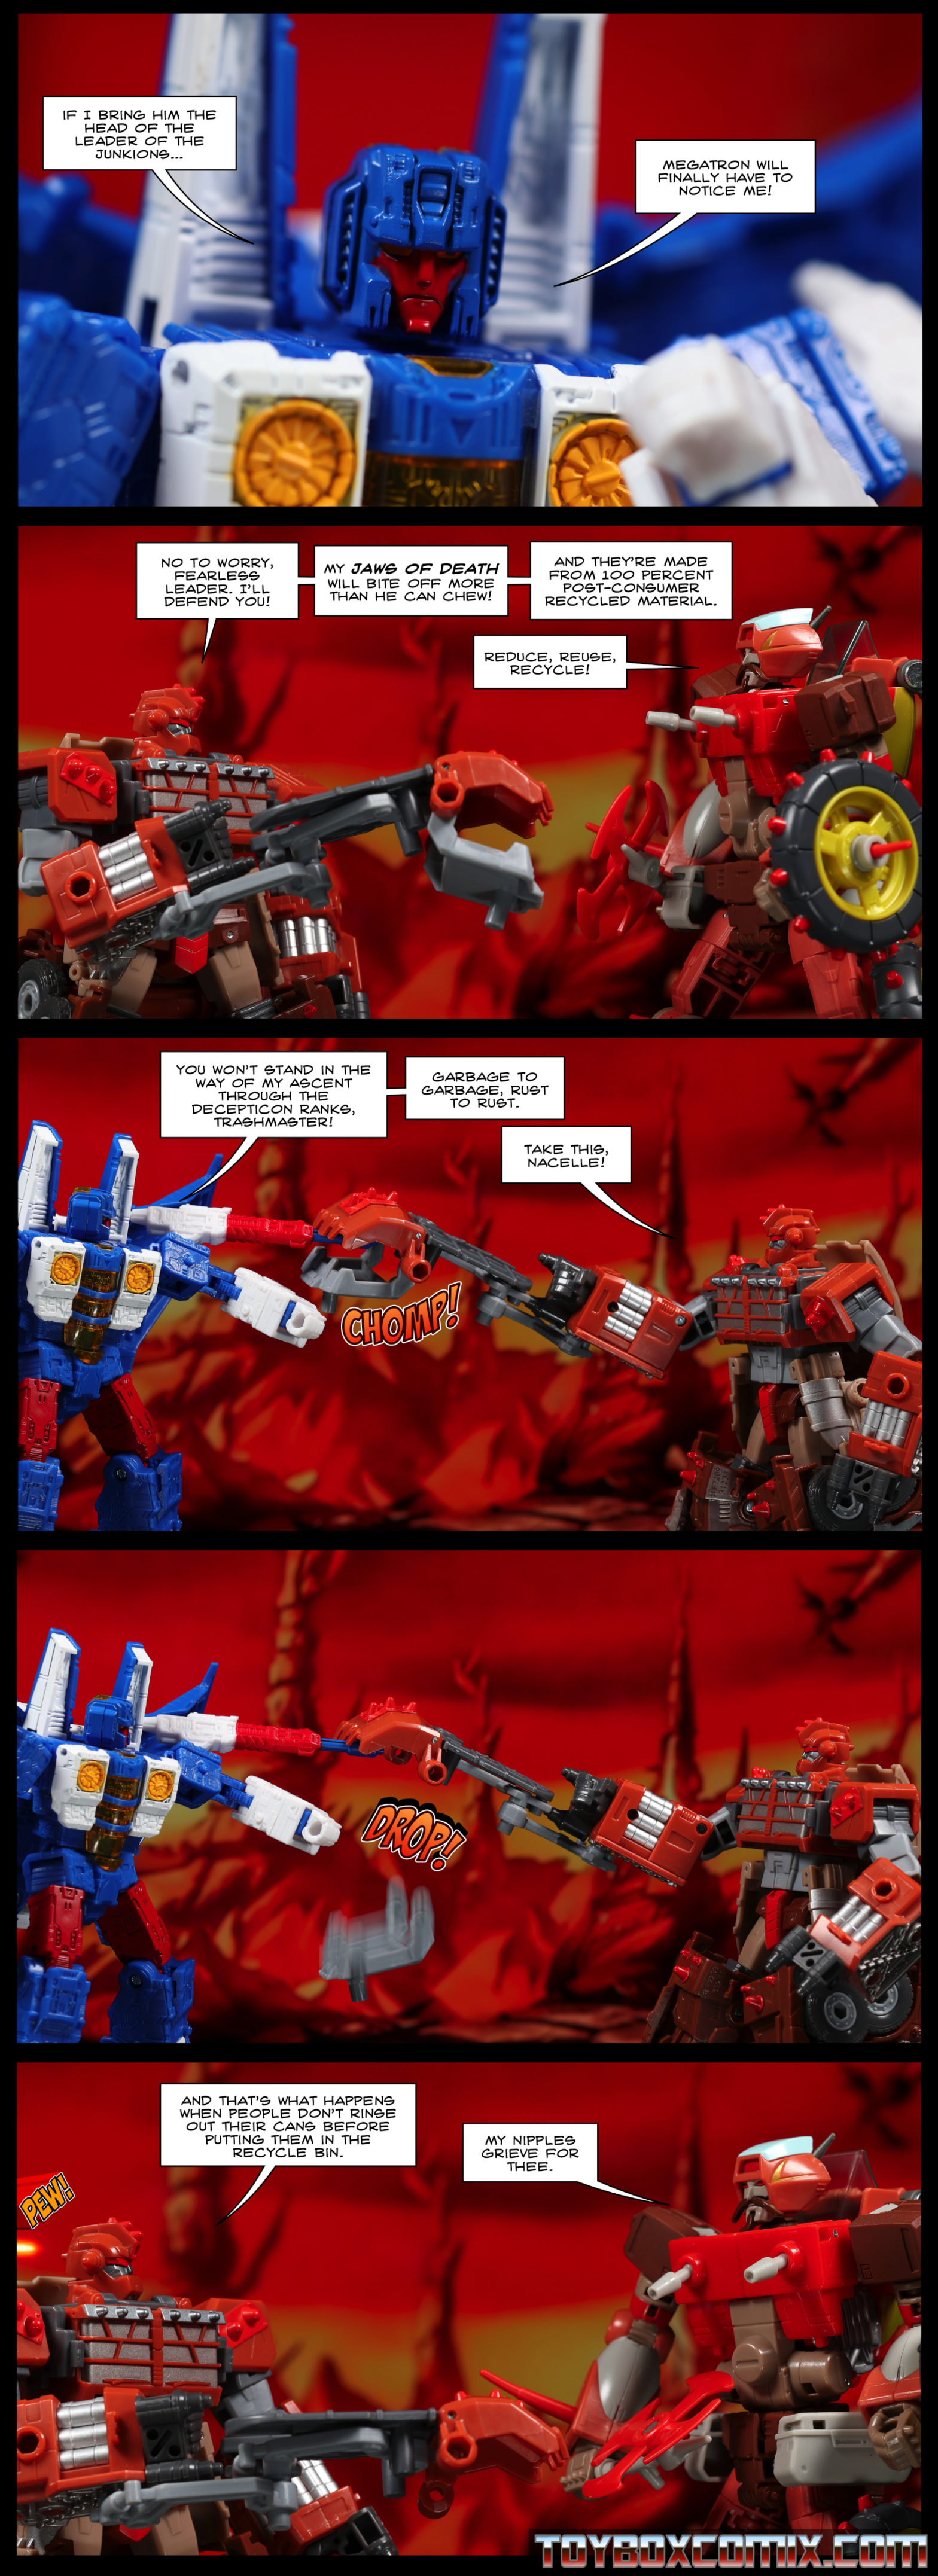 Location: Junkion Panel 1: Nacelle: “If I bring him the head of the leader of the Junkions, Megatron will finally have to notice me!” 2: Trashmaster, holding up his claw weapon: “Not to worry, fearless leader. I’ll defend you! My jaws of death will bite off more than he can chew! And they’re made from 100 percent post-consumer recycled material.” Wreck-Gar: “Reduce, reuse, recycle!” 3: Nacelle: “You won’t stand in the way of my ascent through the Decepticon ranks, Trashmaster! Garbage to garbage, rust to rust.” Trashmaster: “Take this, Nacelle!” Trashmaster’s claw weapon chomps down on Nacelle’s arm-mounted gun. 4: The jaw portion of Trashmaster’s weapon falls off and drops to the ground. 5: Trashmaster: “And that’s what happens when people don’t rinse out their cans before putting them in the recycle bin.” Wreck-Gar, his chest-guns pointing downward. “My nipples grieve for thee.” A laser blast approaches the back of Trashmaster’s head.